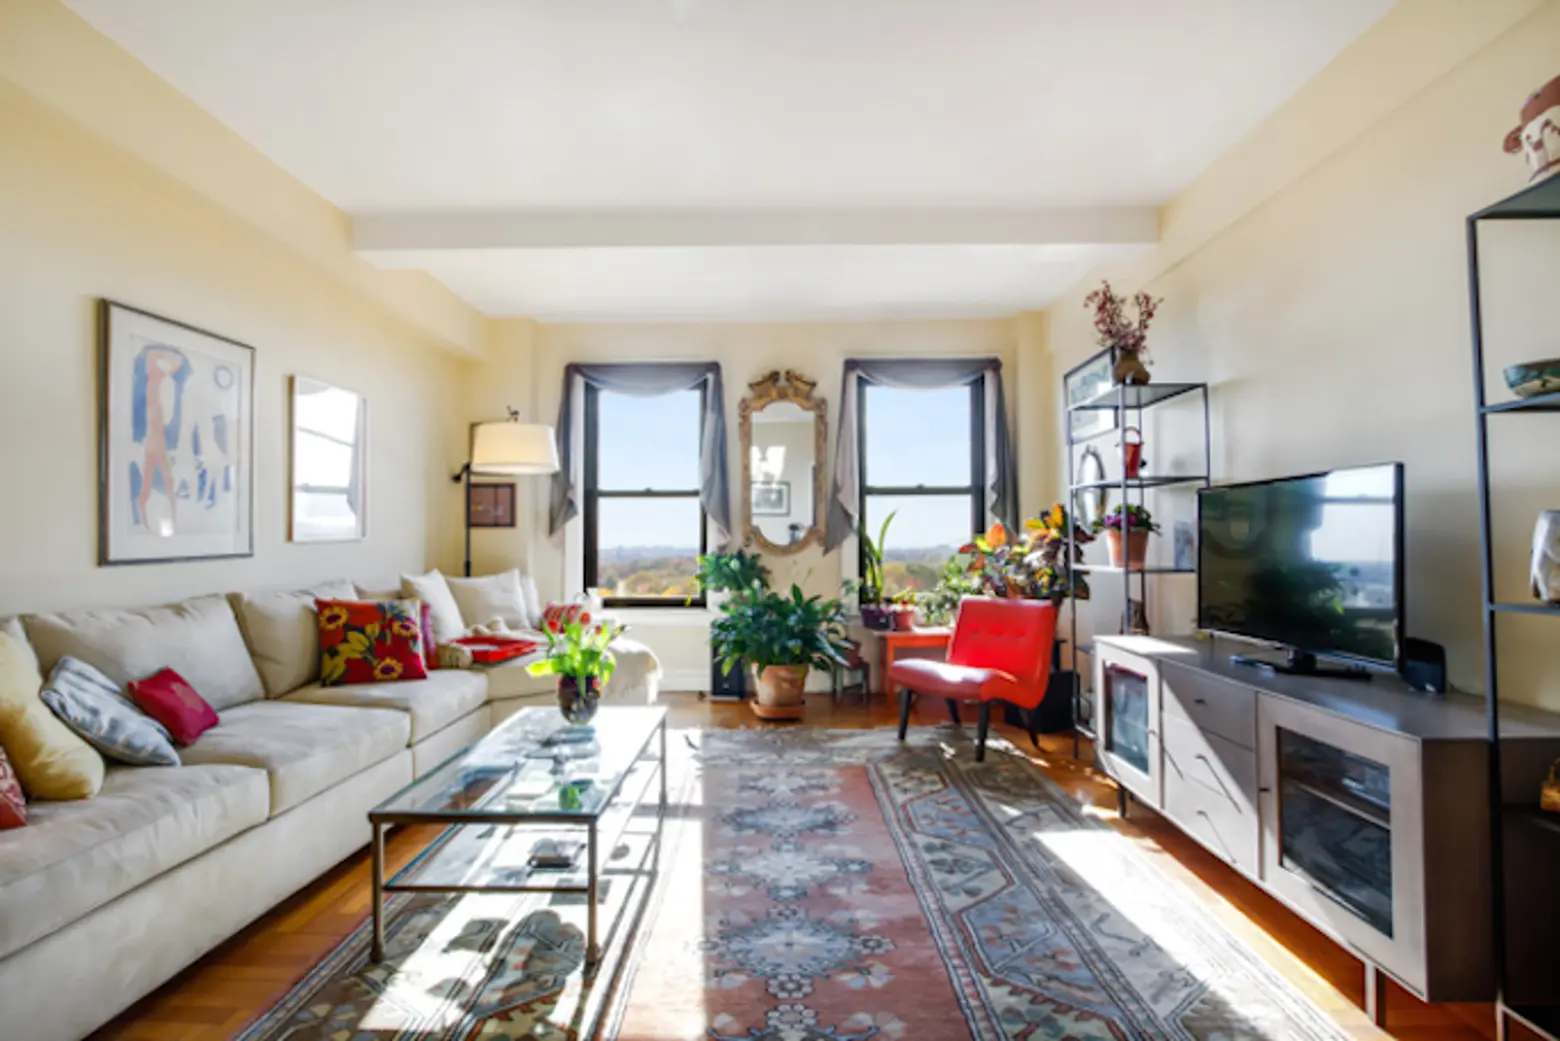 135 Eastern Parkway, Prospect Heights, Co-op, Brooklyn apartment for sale, classic seven, Turner Towers